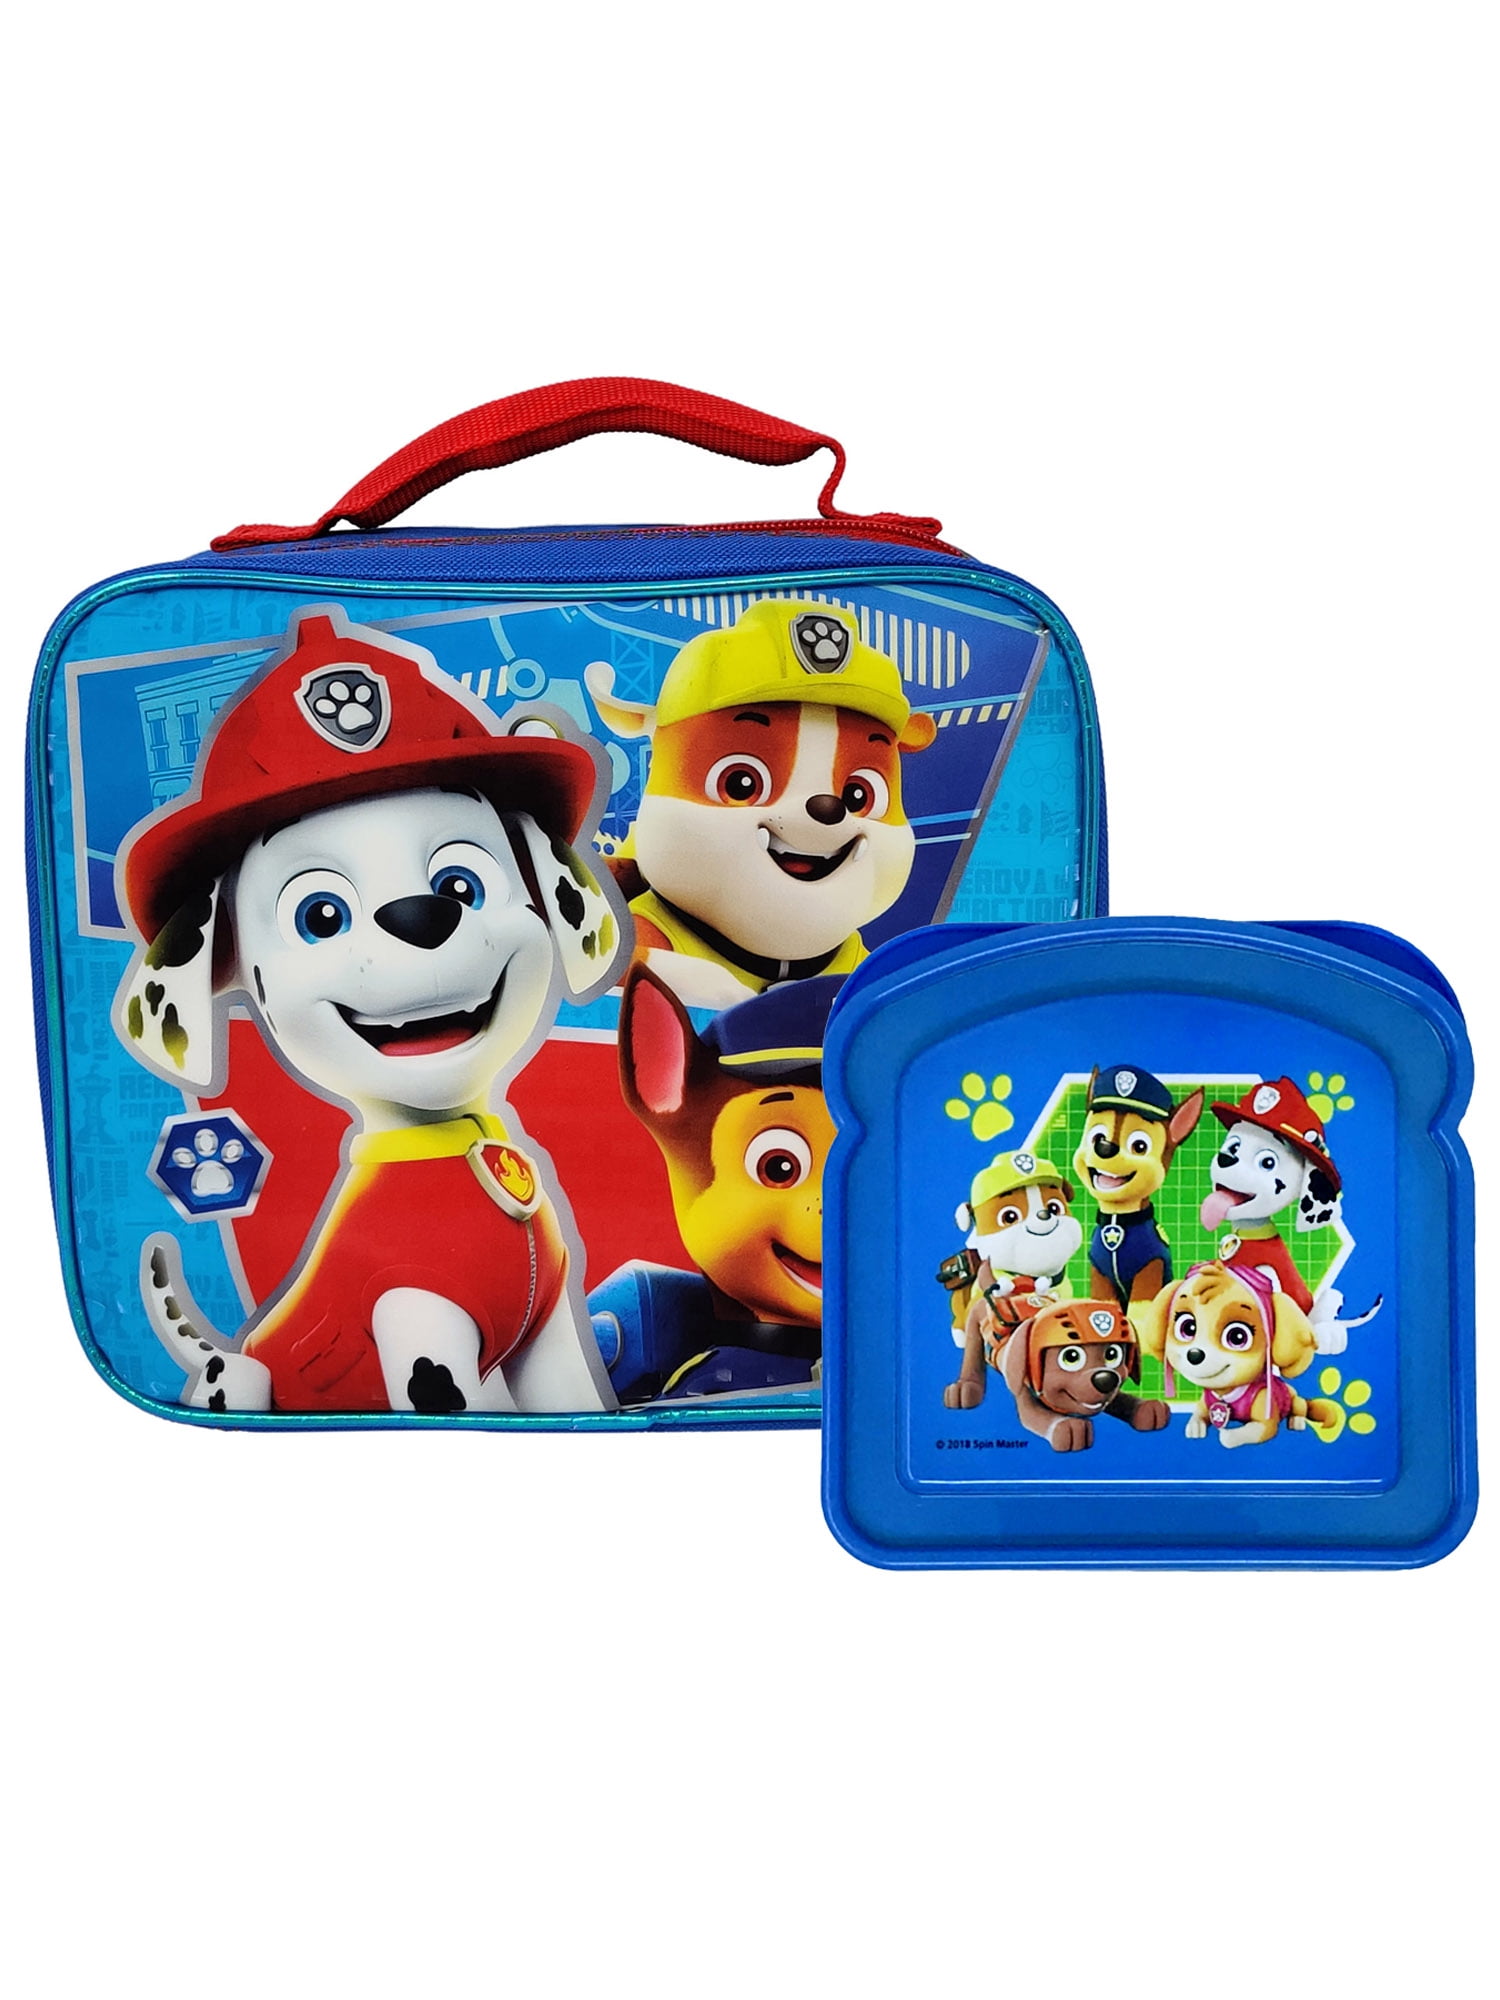 Nickelodeon Paw Patrol  Dual Insulated Lunch Bag Tote 